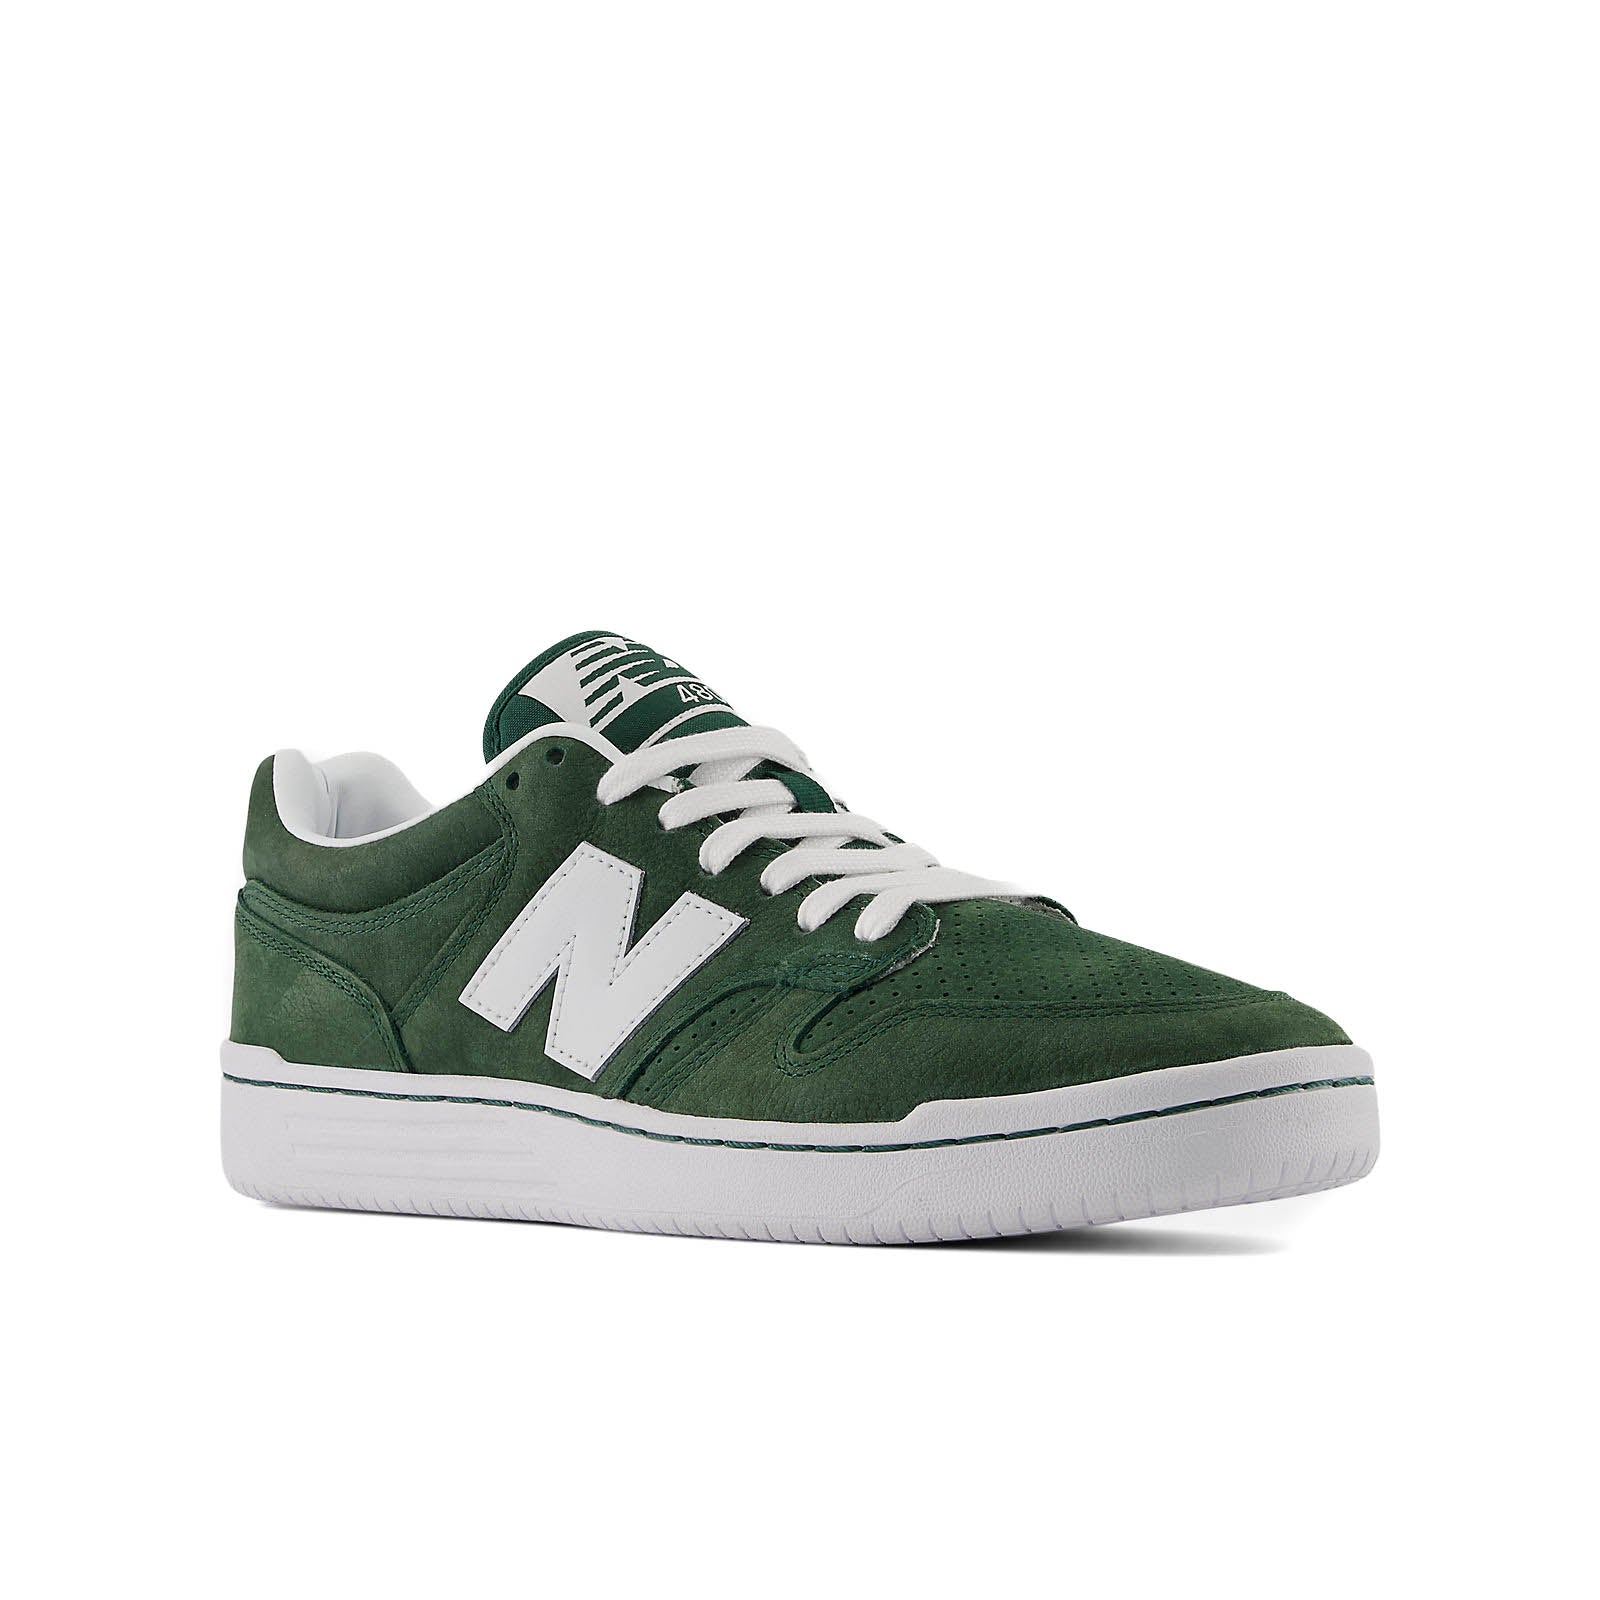 NB Numeric 480 - Forest Green